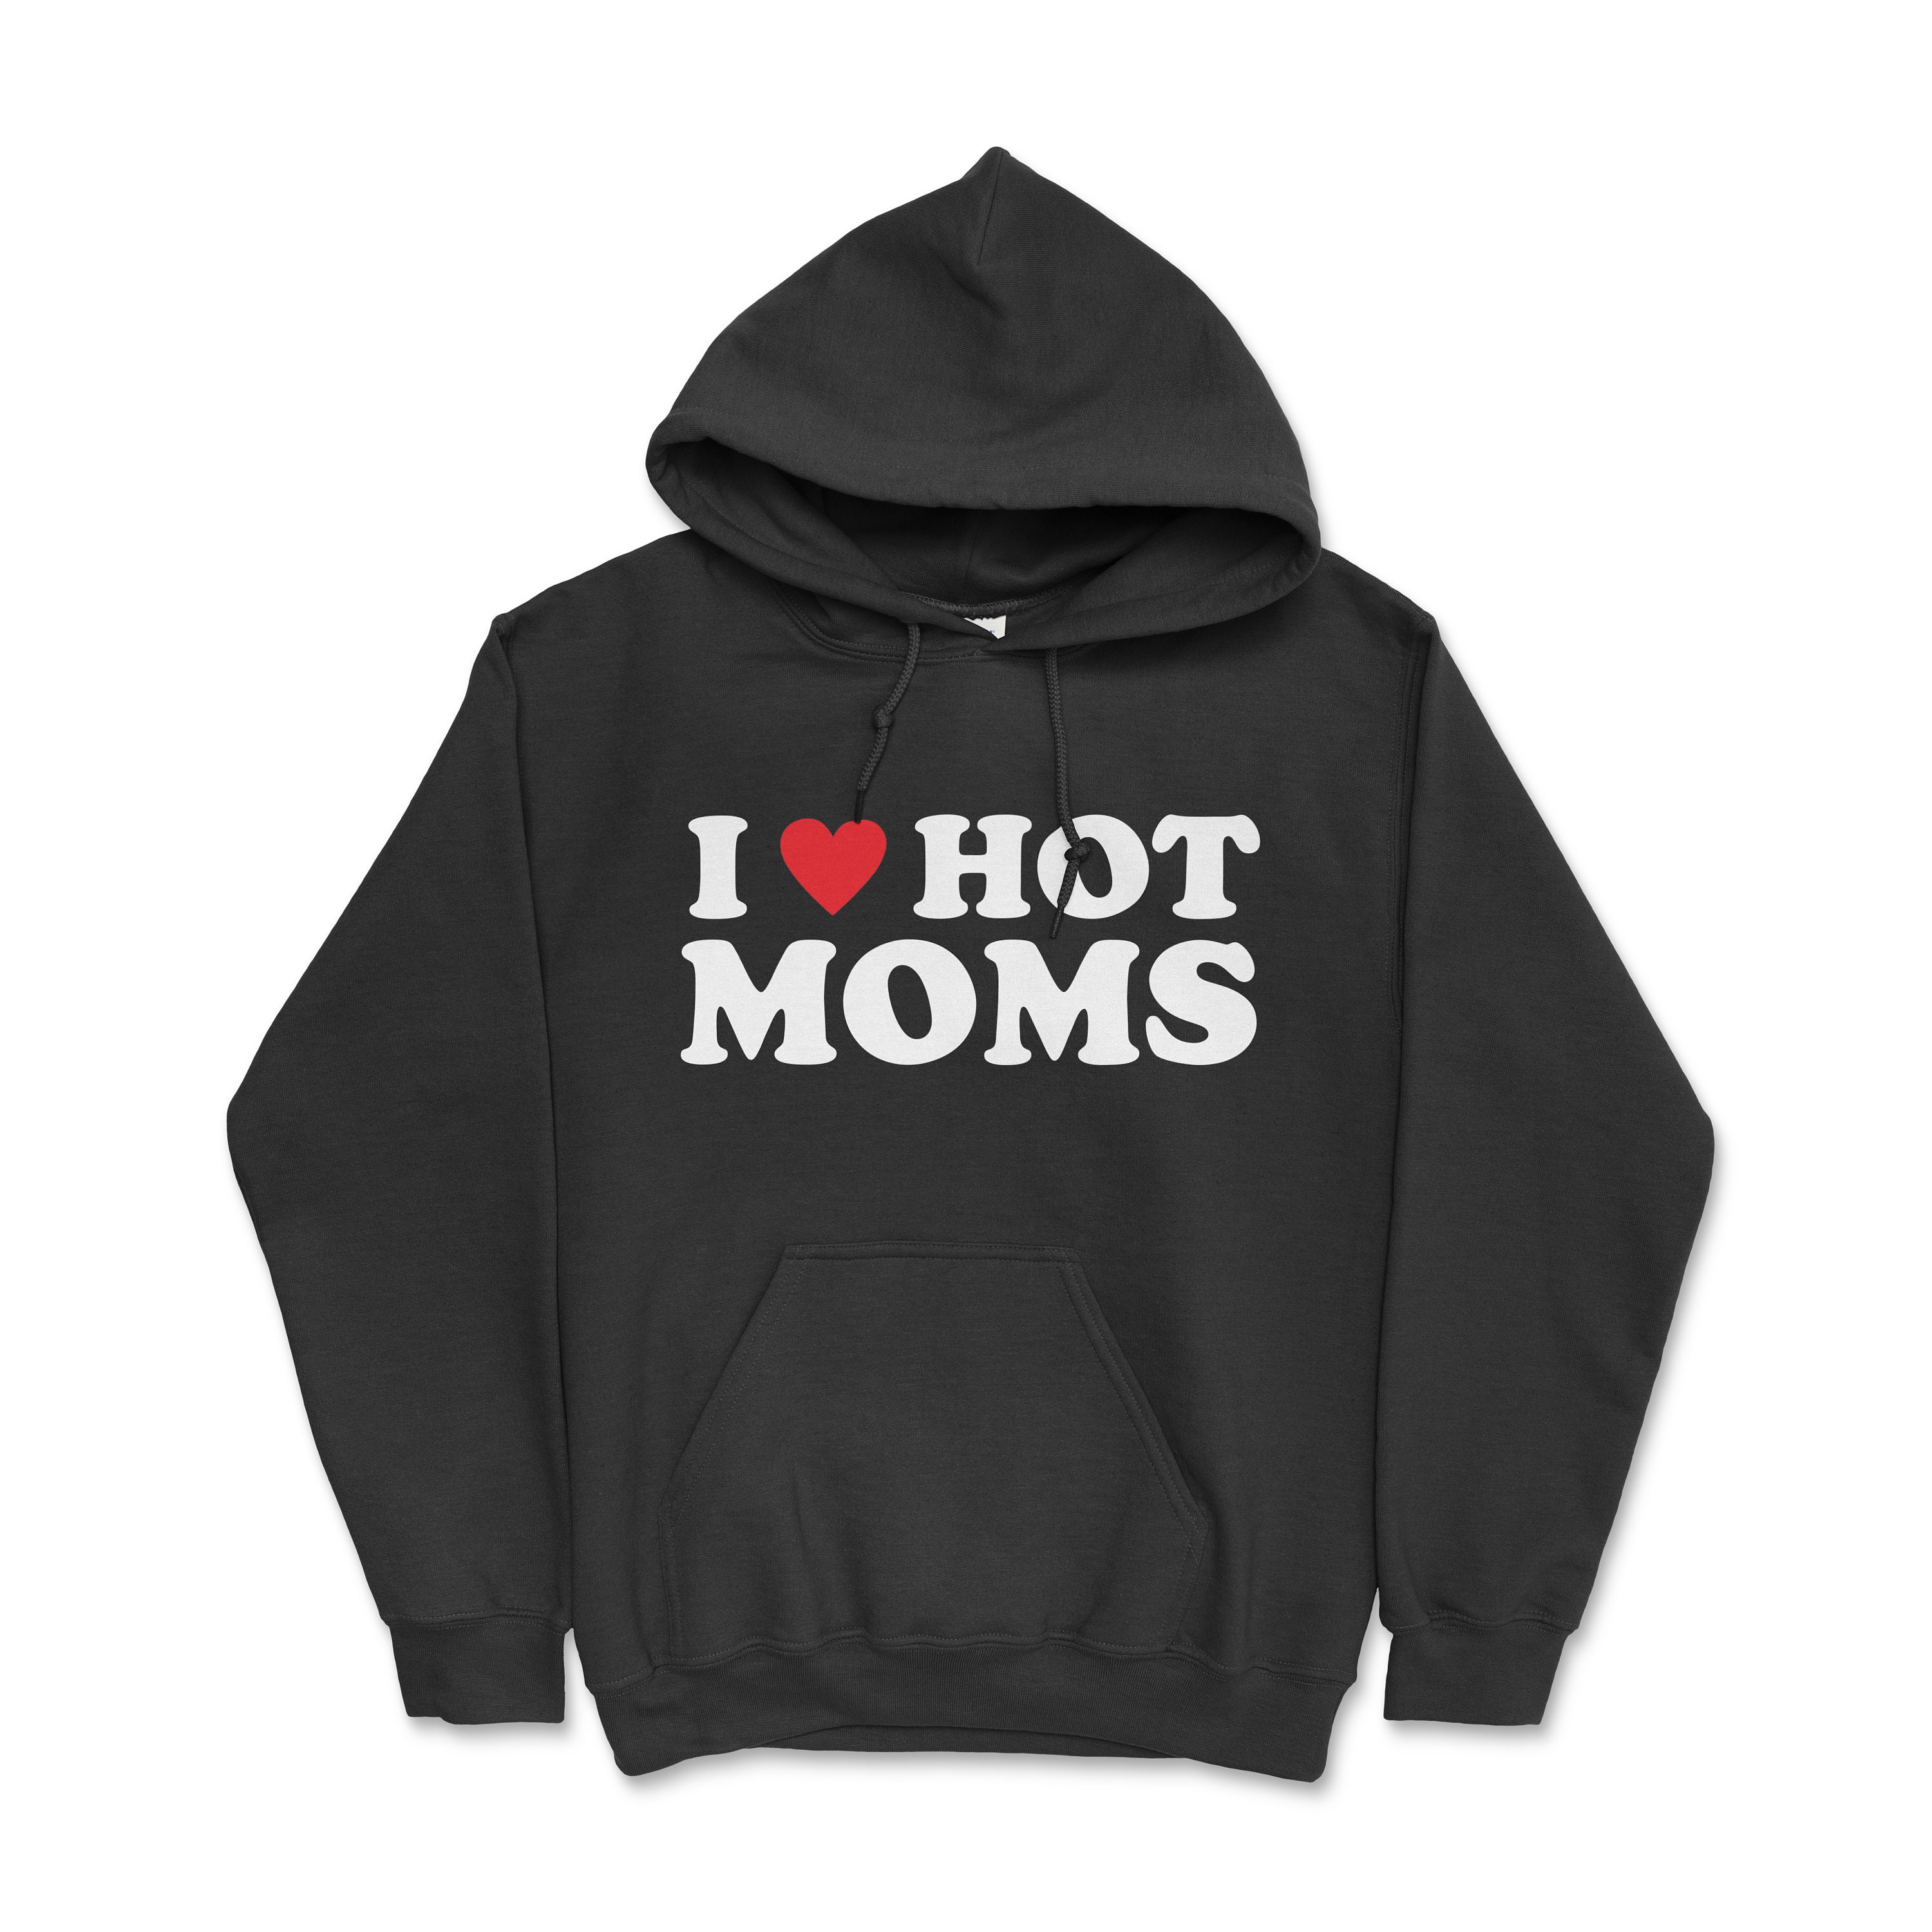 I Love Hot Moms Unisex Hoodie Heart Hot Selling Products Best Sellers Plus Much More High